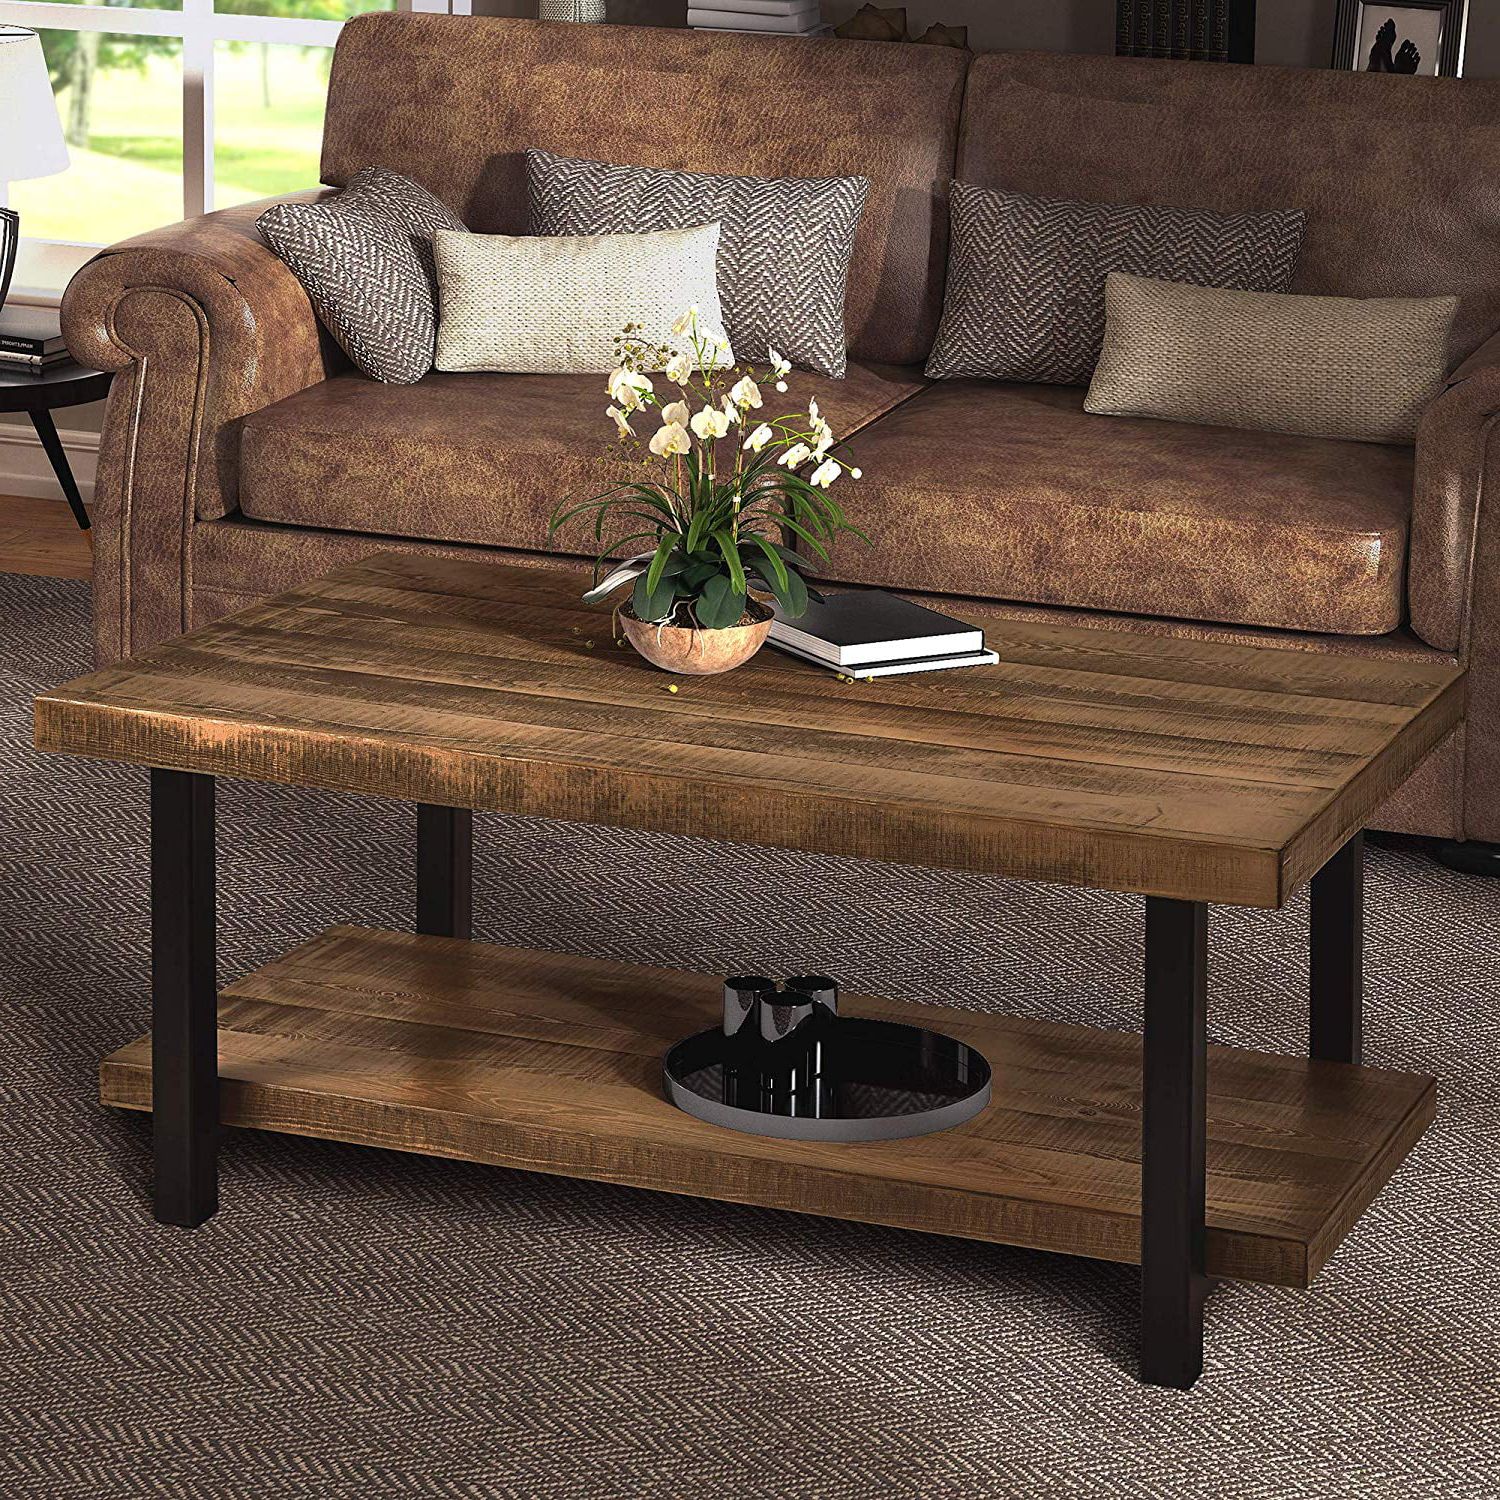 Harper&bright Designs Industrial Rectangular Pine Wood Coffee Table Pertaining To Brown Rustic Coffee Tables (Gallery 7 of 20)